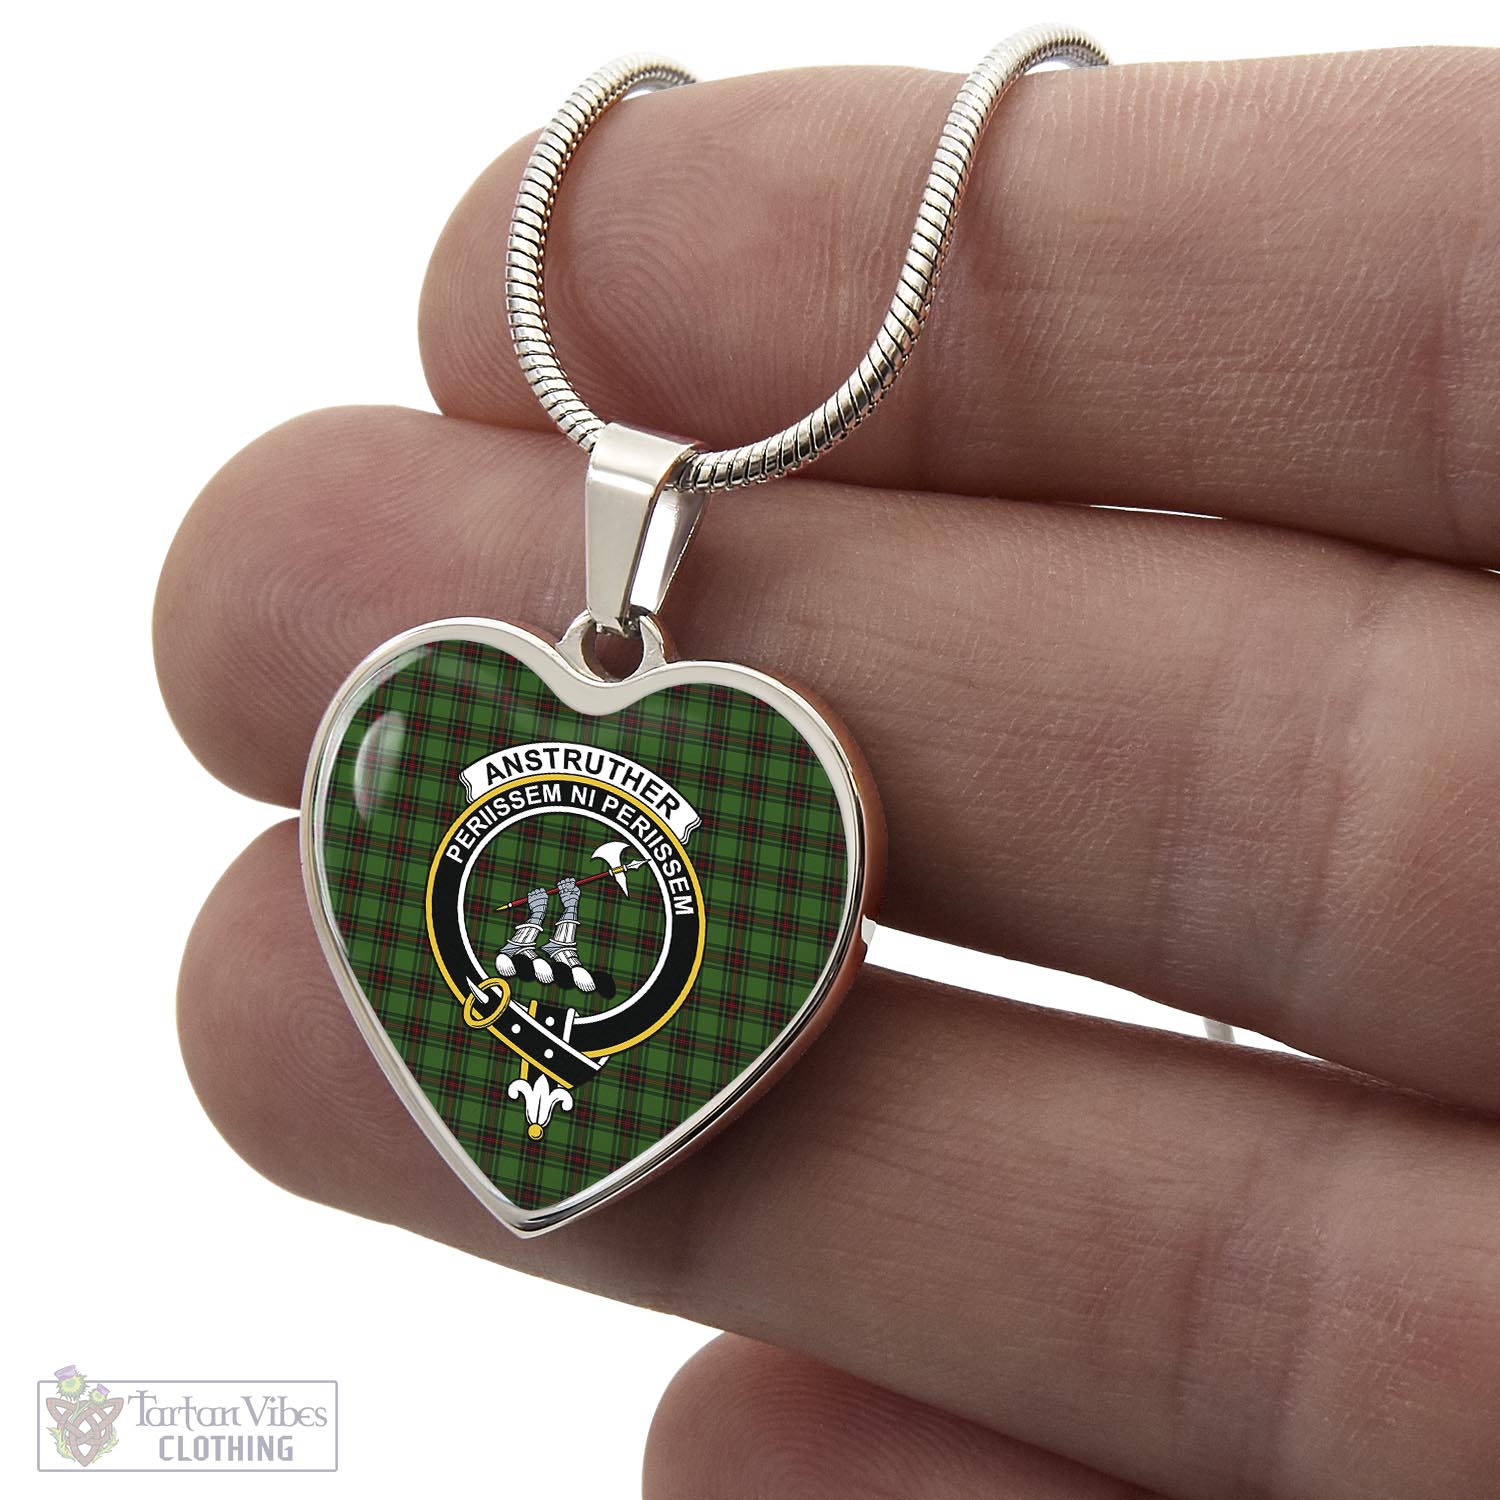 Tartan Vibes Clothing Anstruther Tartan Heart Necklace with Family Crest